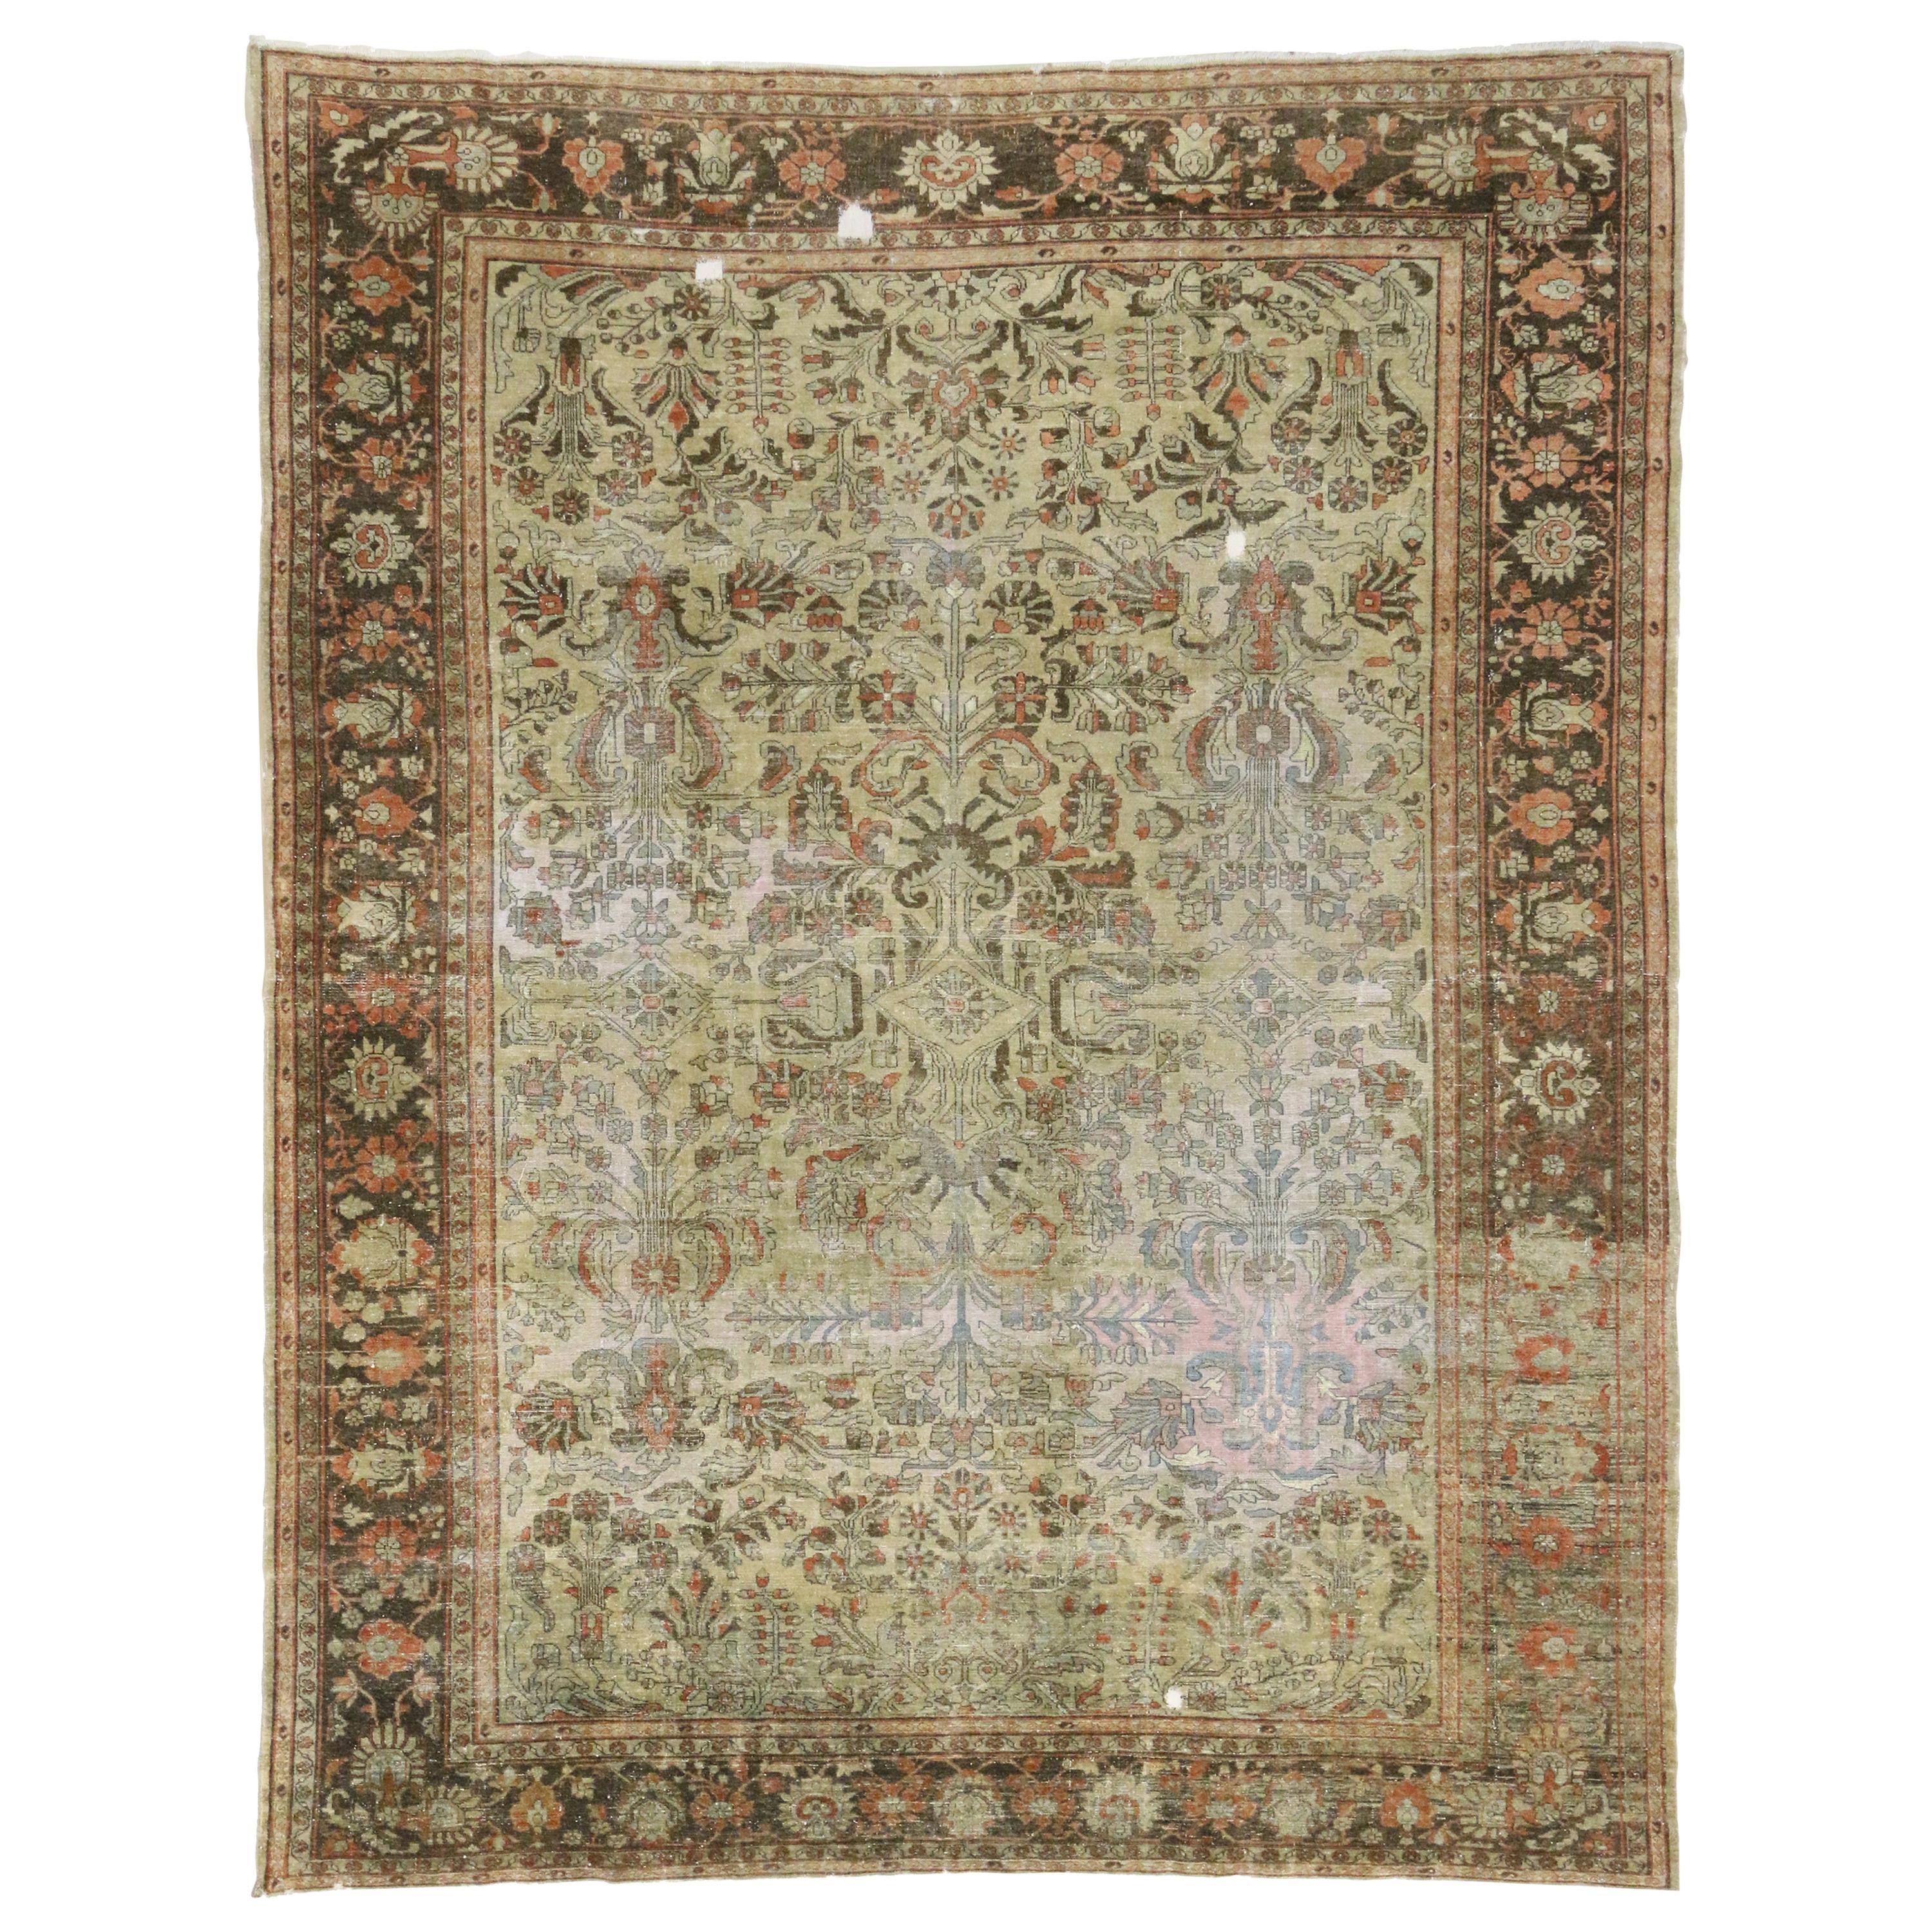 Distressed Antique Persian Lilihan Rug with Modern English Chintz Rustic Style